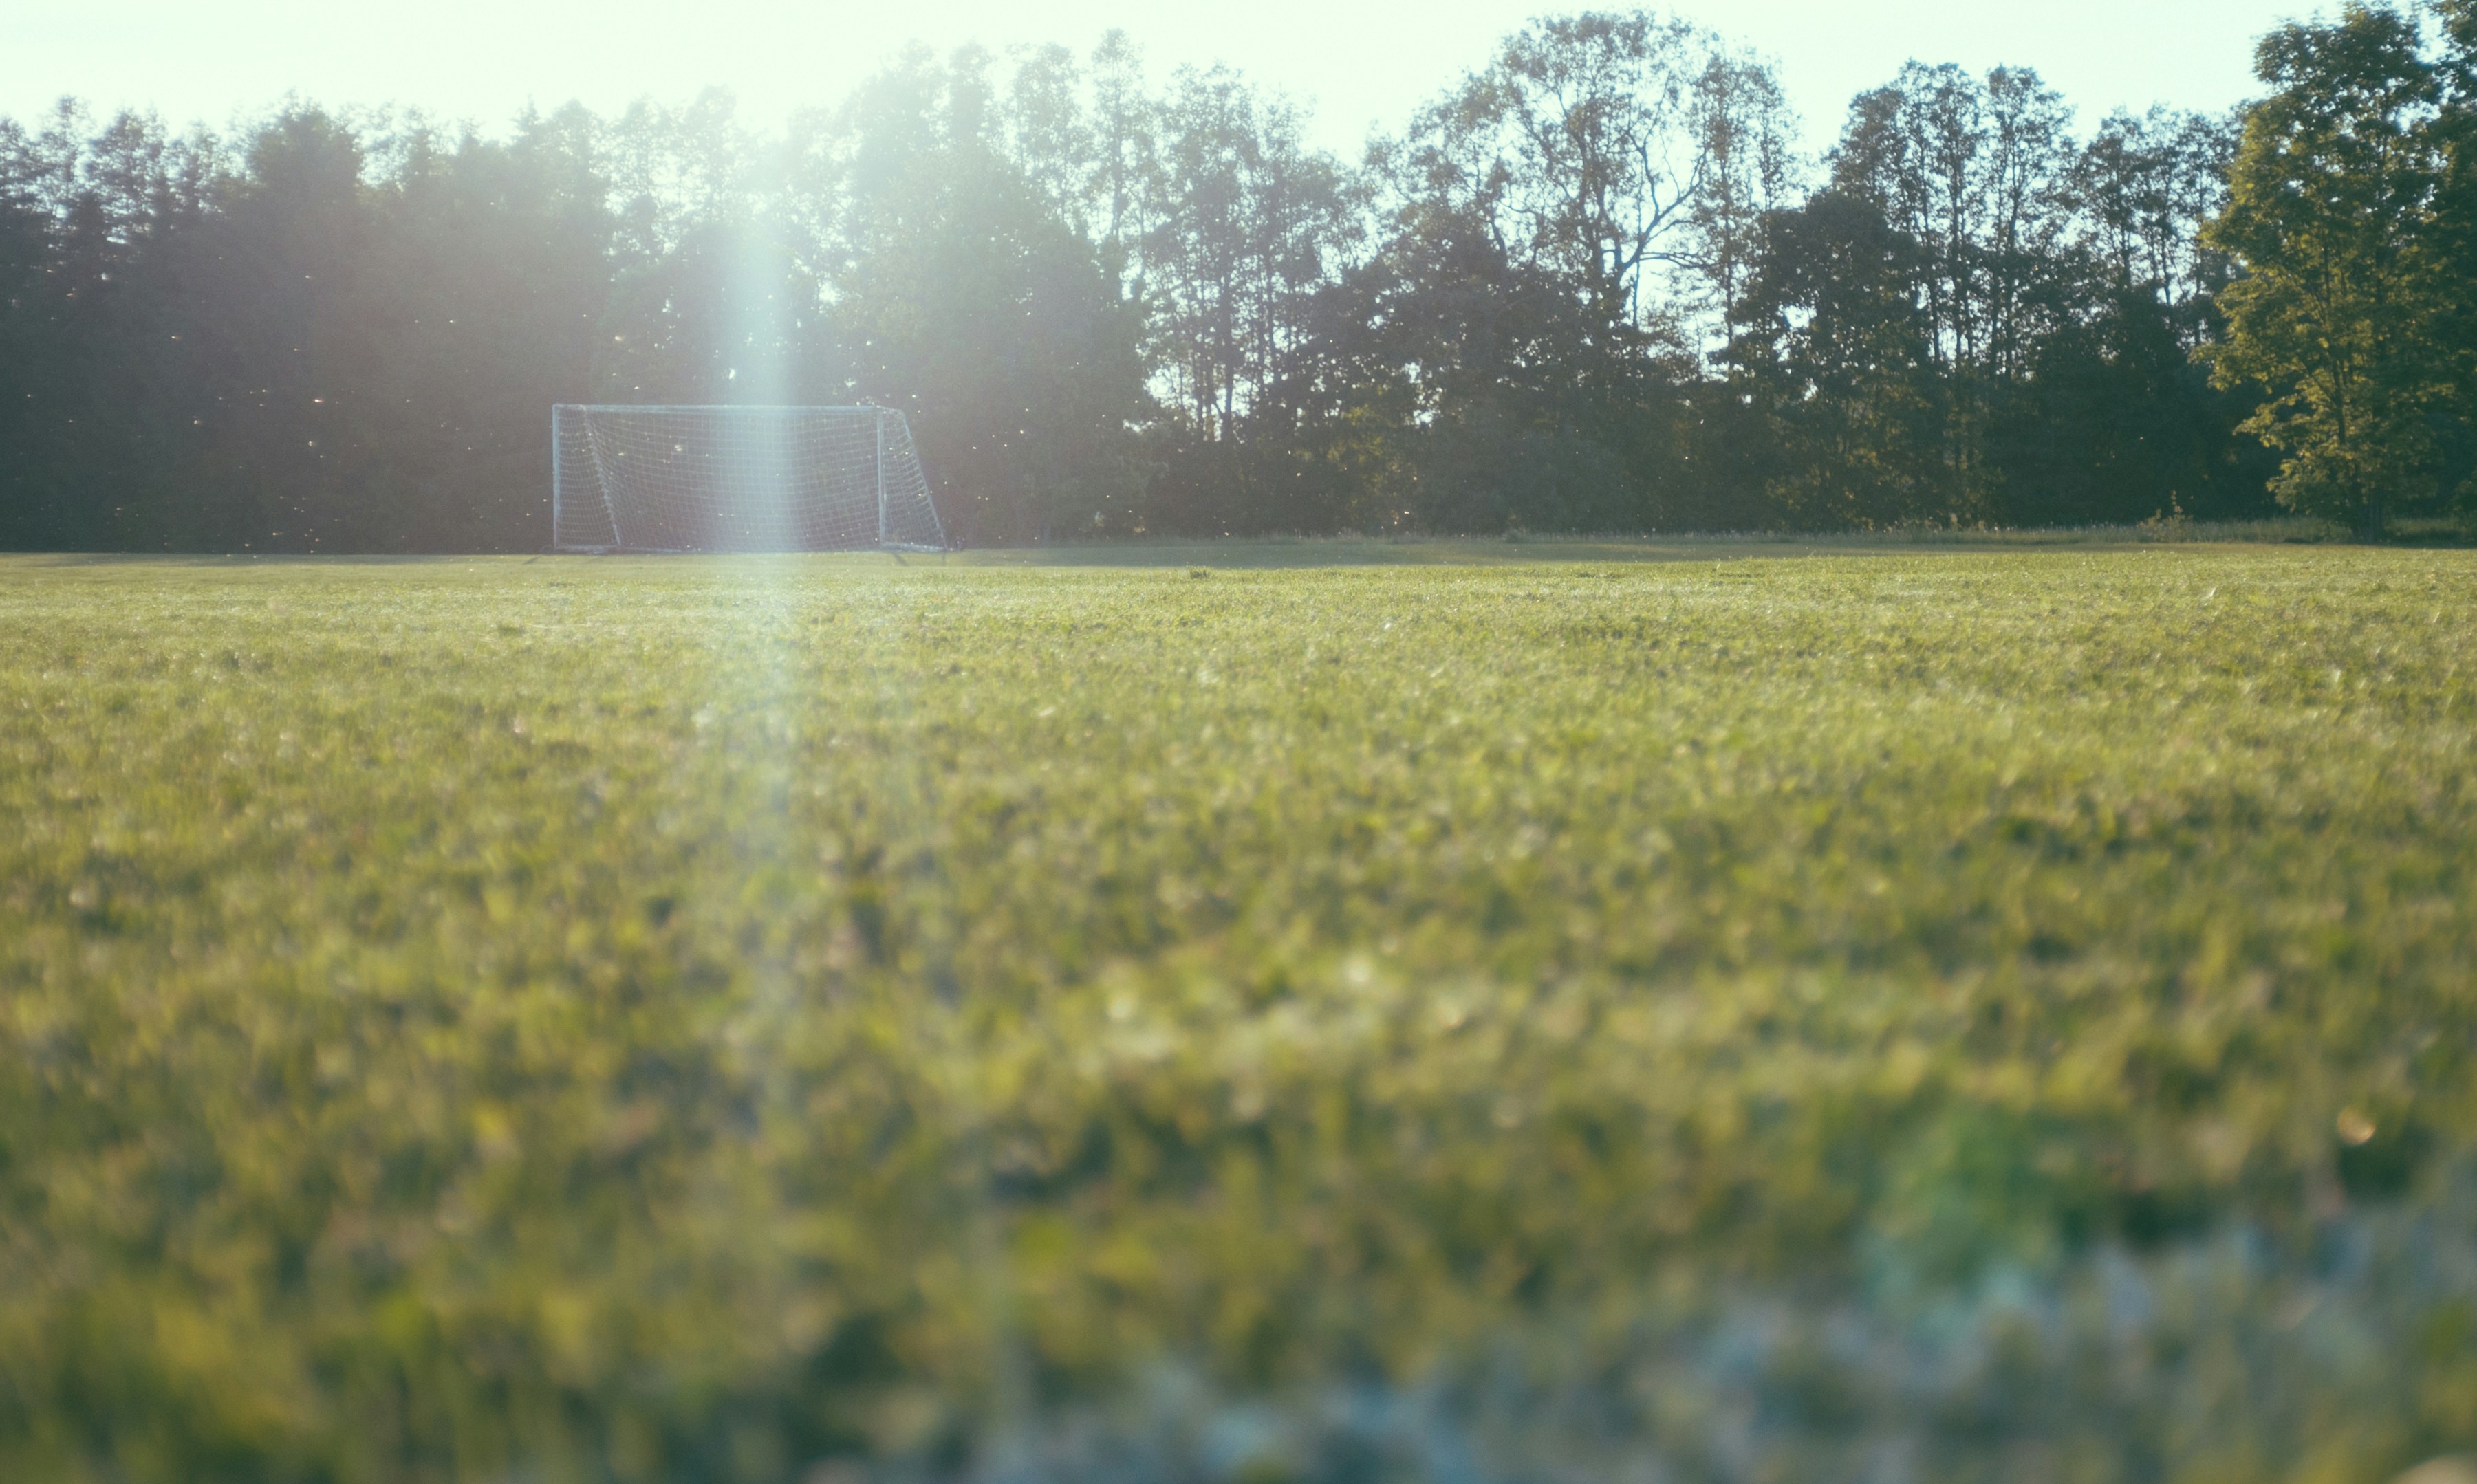 Field with soccer goal near the forest